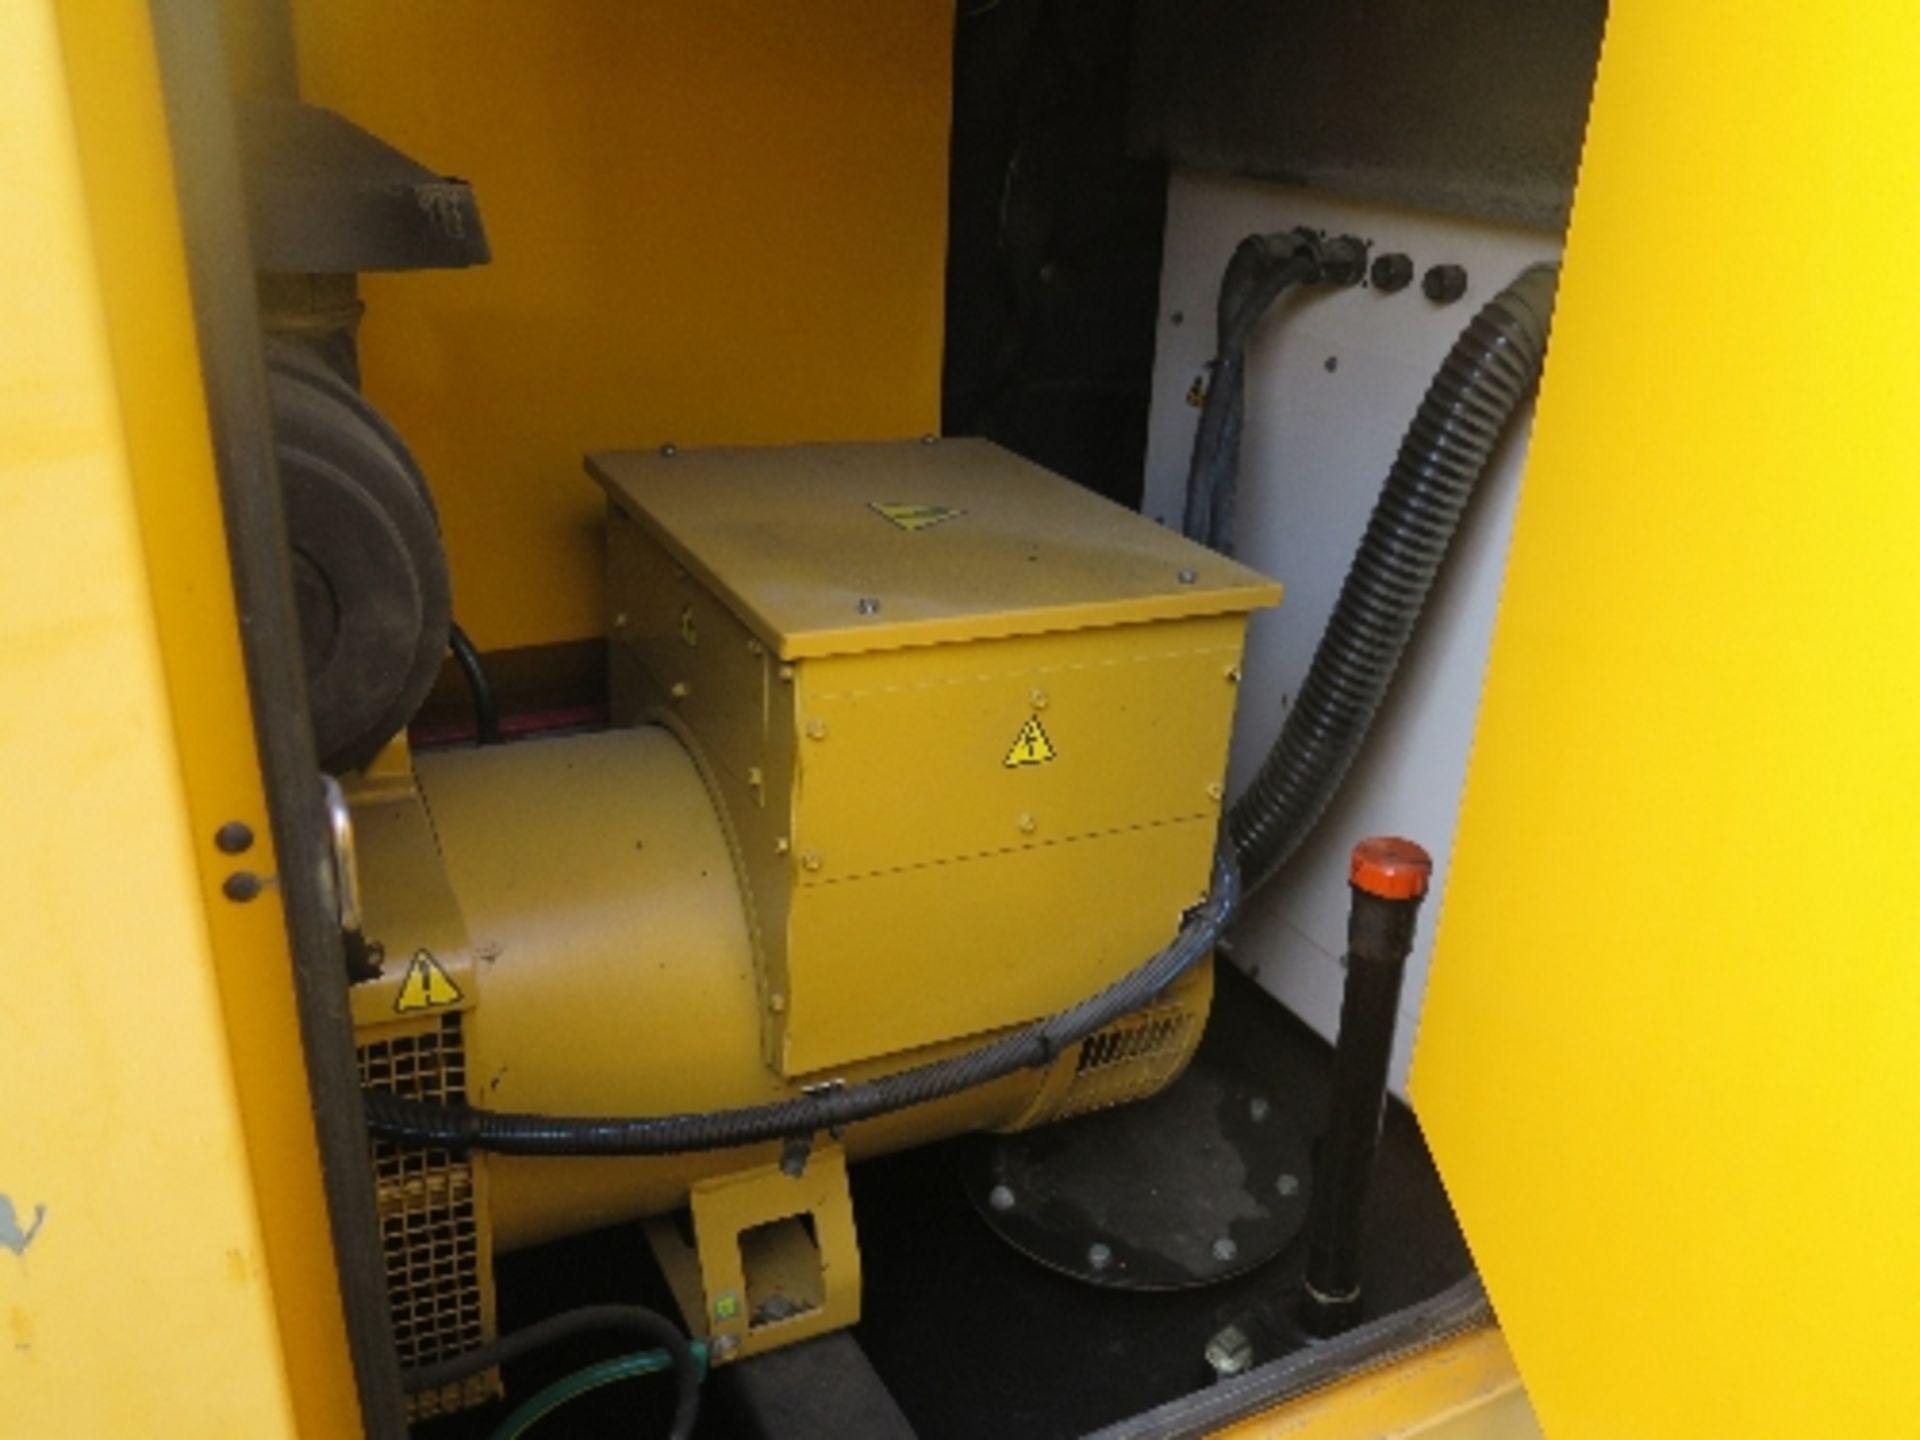 Caterpillar XQE80 generator 10433 hrs 145934
PERKINS - RUNS AND MAKES POWER
ALL LOTS are SOLD AS - Image 4 of 6